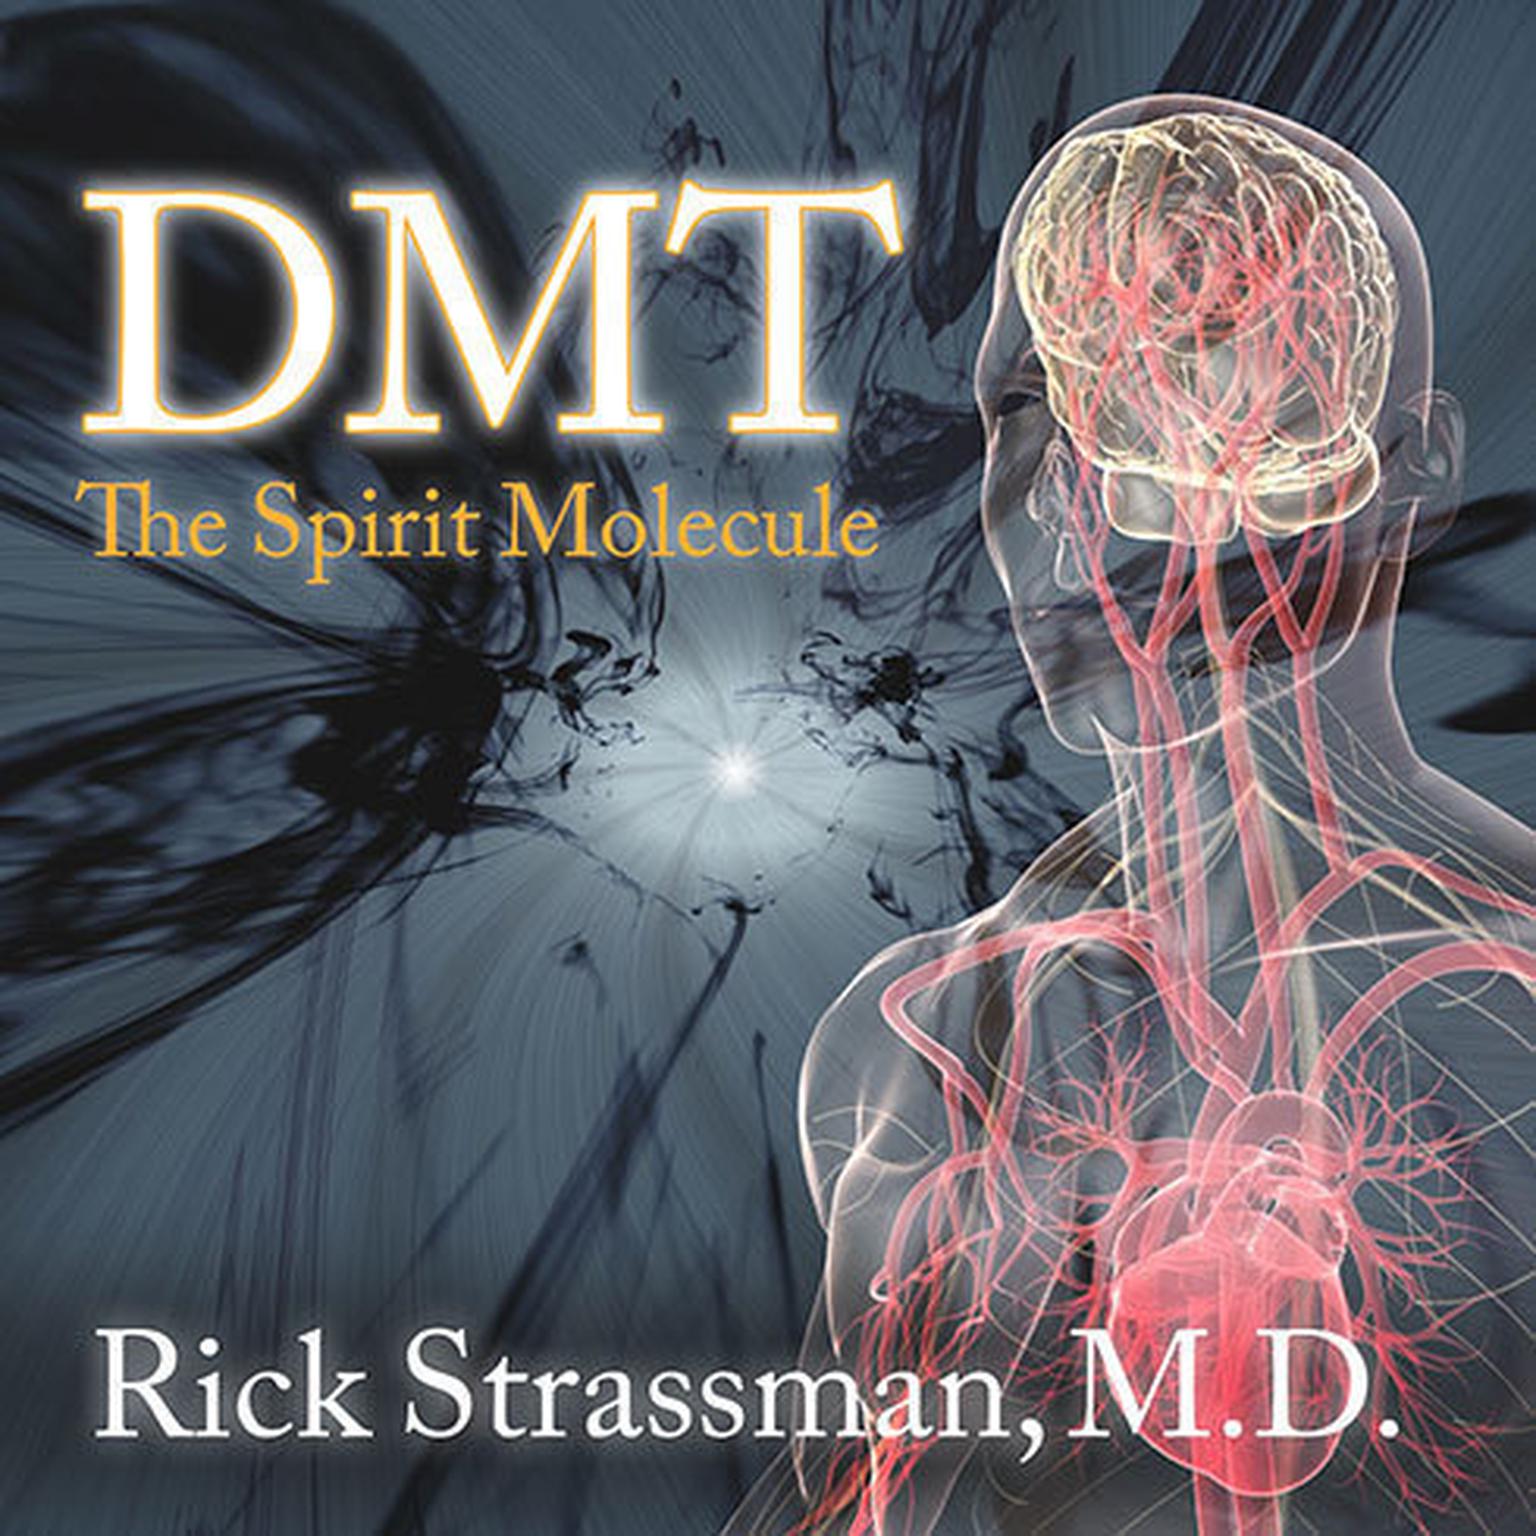 DMT: The Spirit Molecule: A Doctors Revolutionary Research into the Biology of Near-Death and Mystical Experiences Audiobook, by Rick Strassman